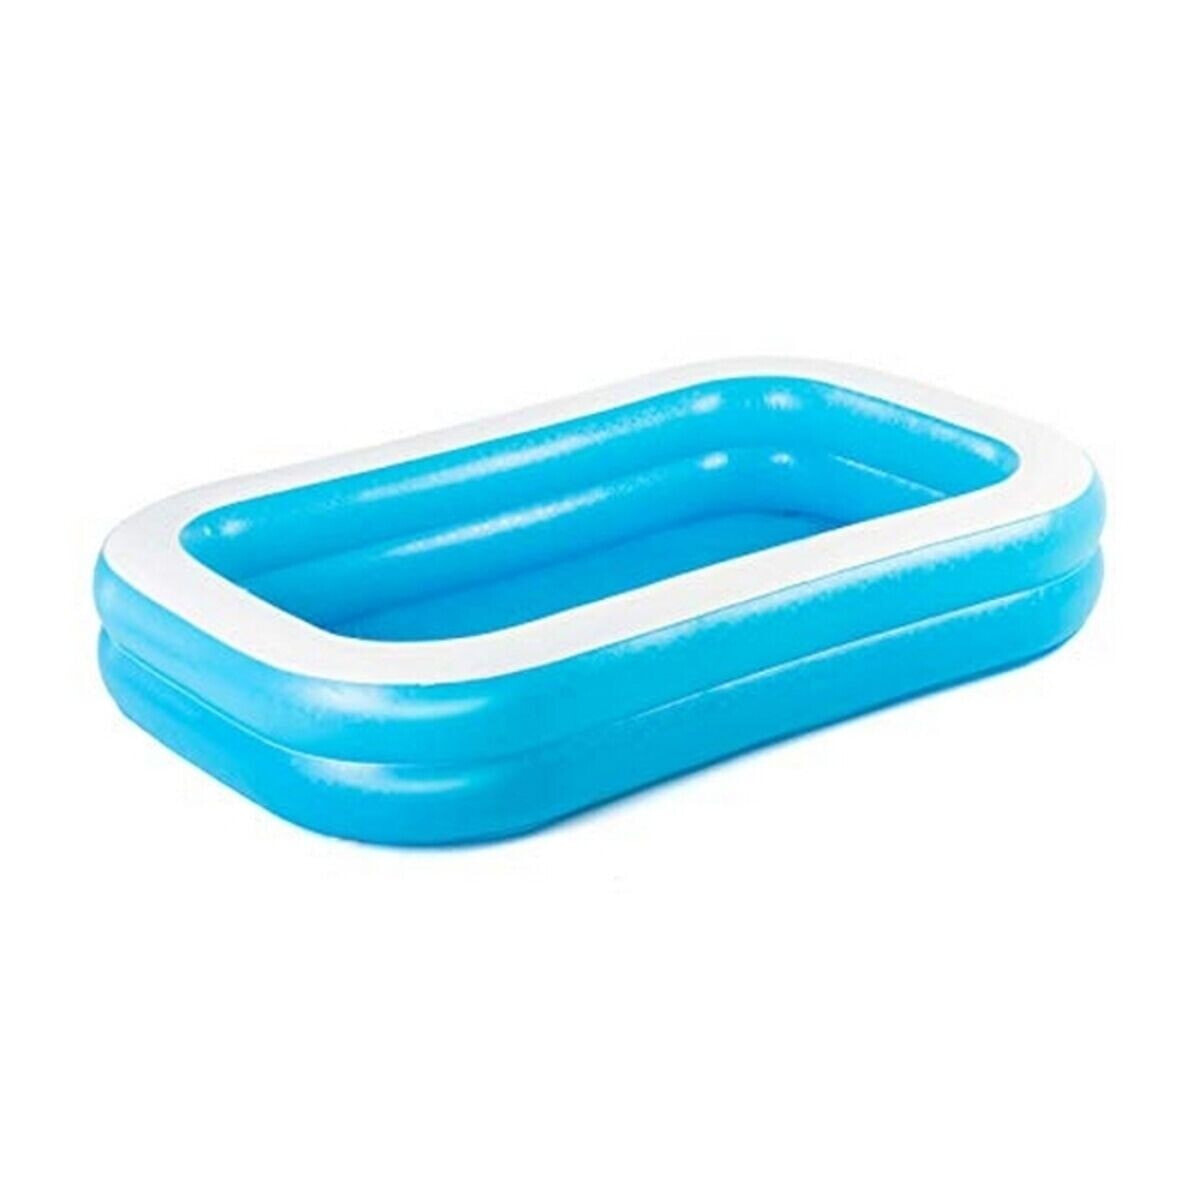 Inflatable Paddling Pool for Children Bestway Multicolour 262 x 175 x 51 cm